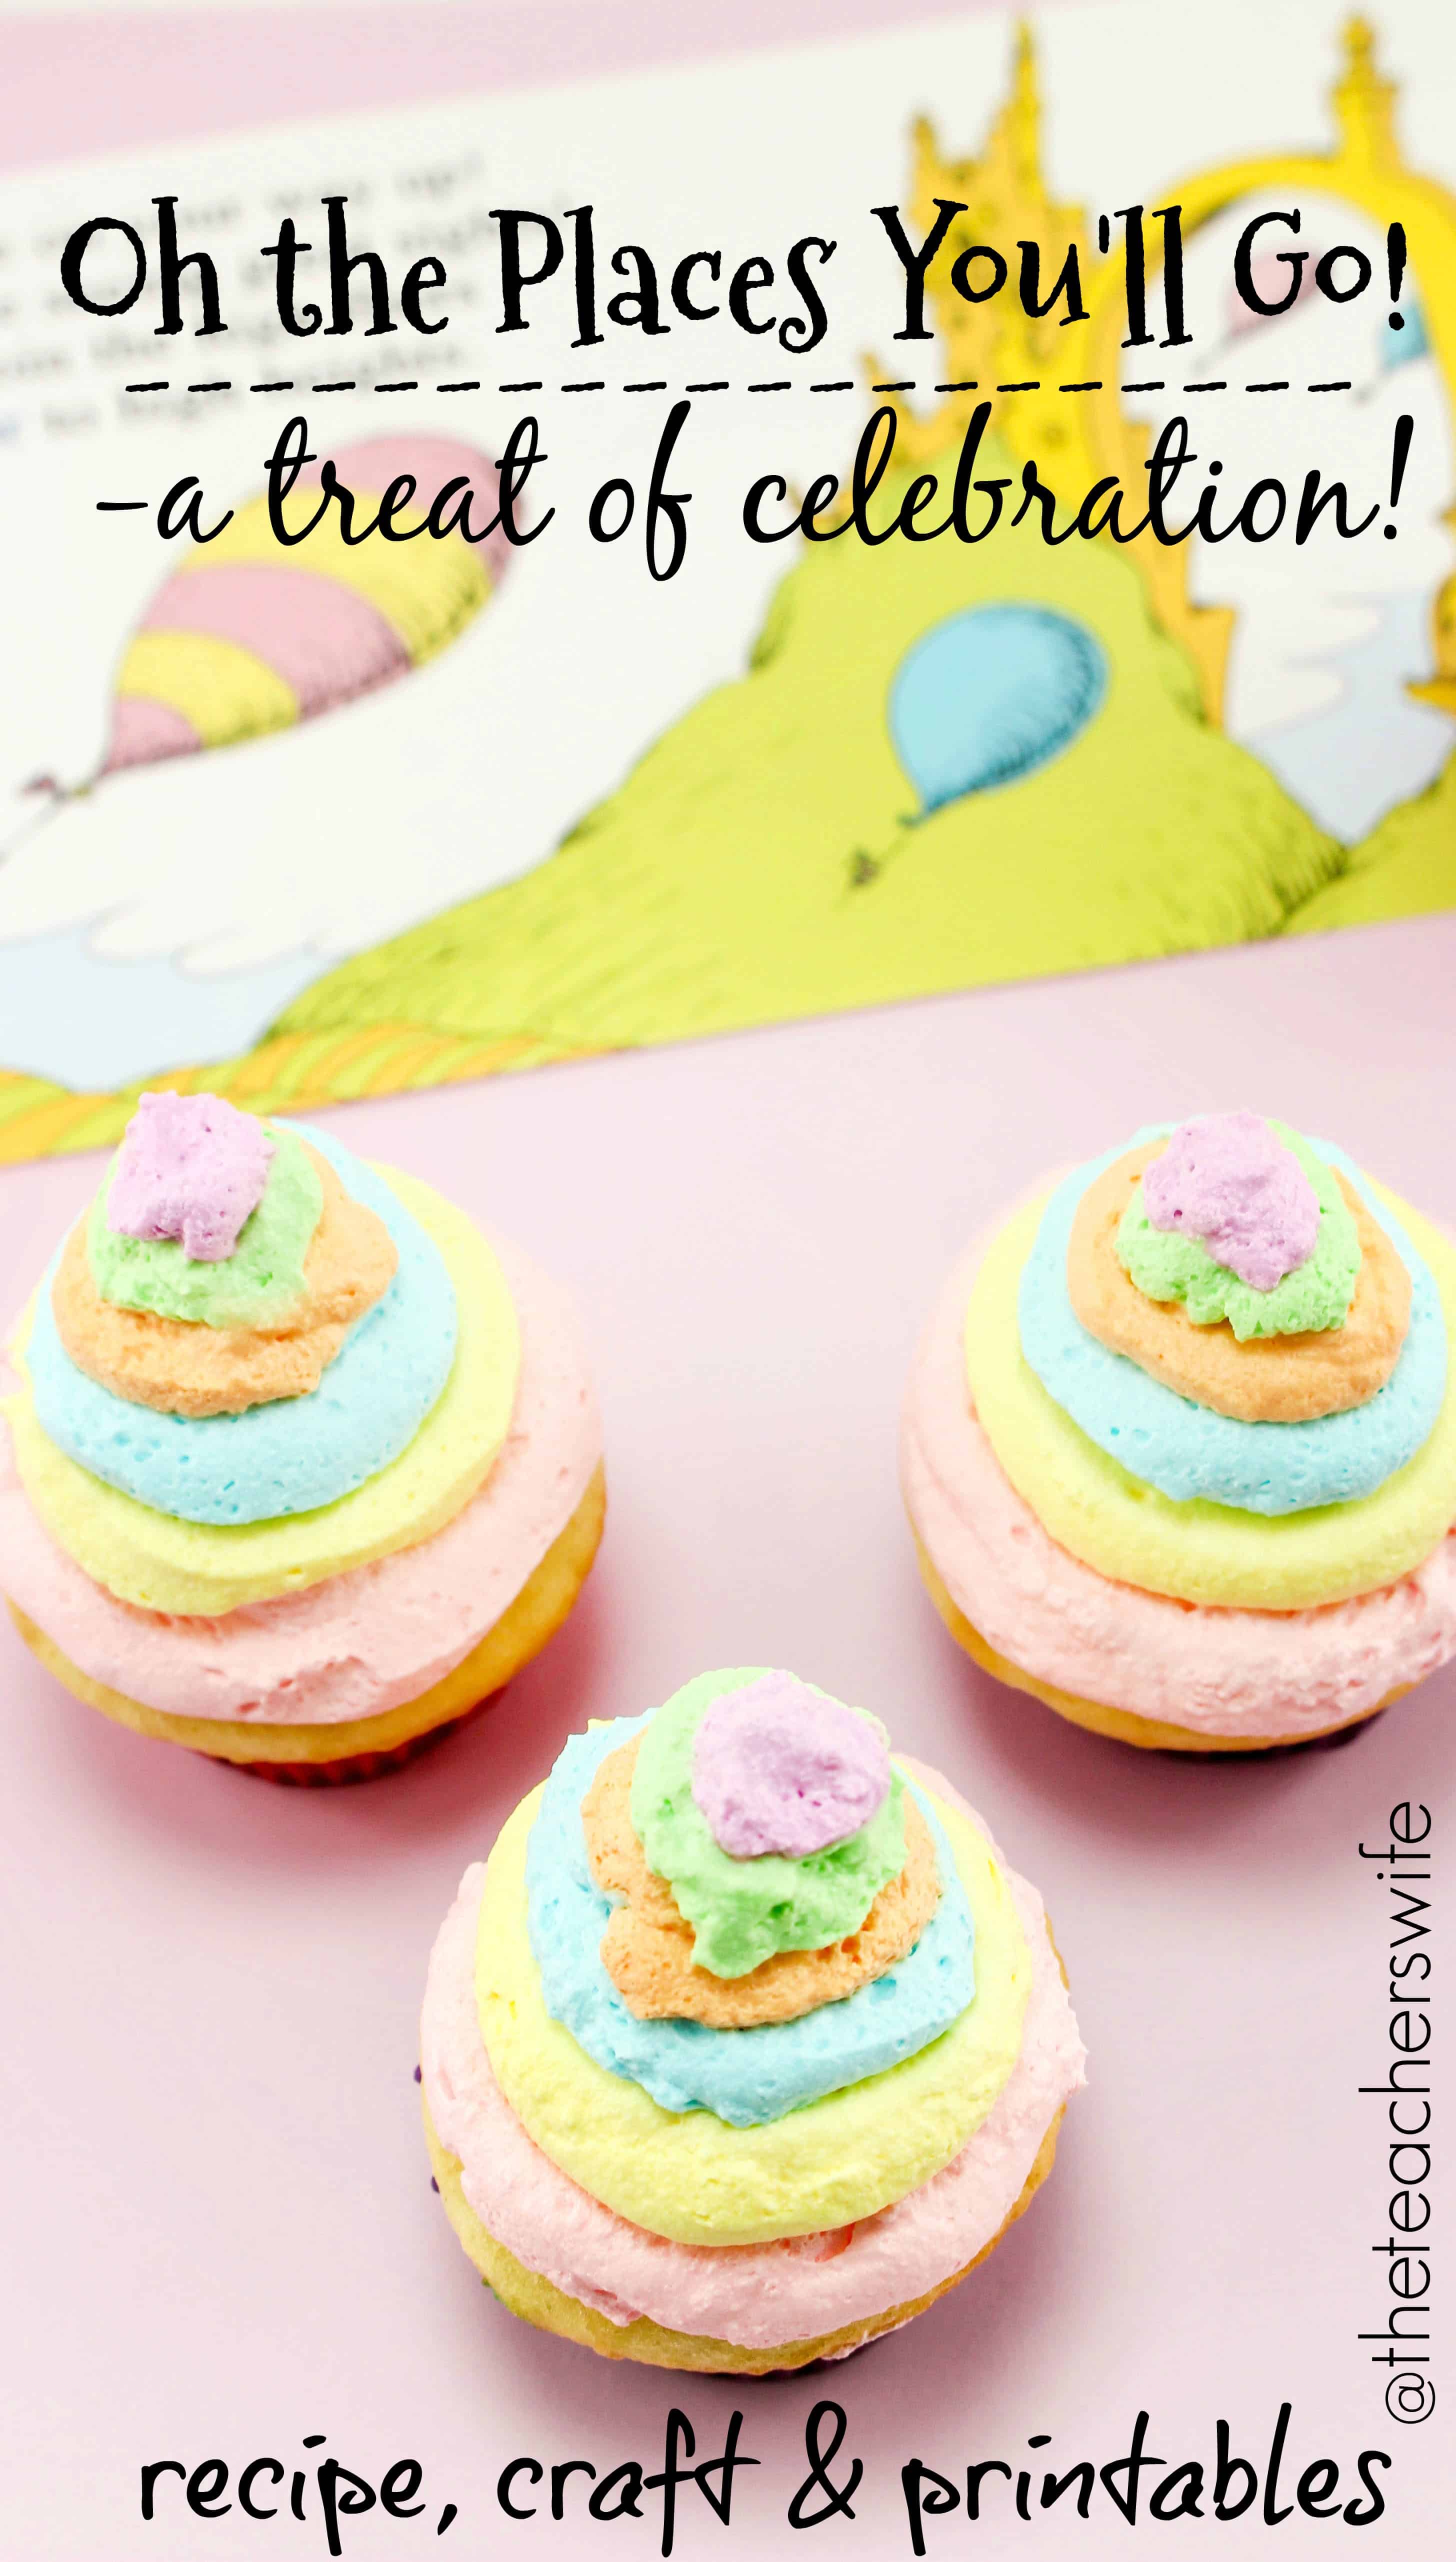 Oh the Places You'll Go Dr. Seuss Cupcakes Recipe